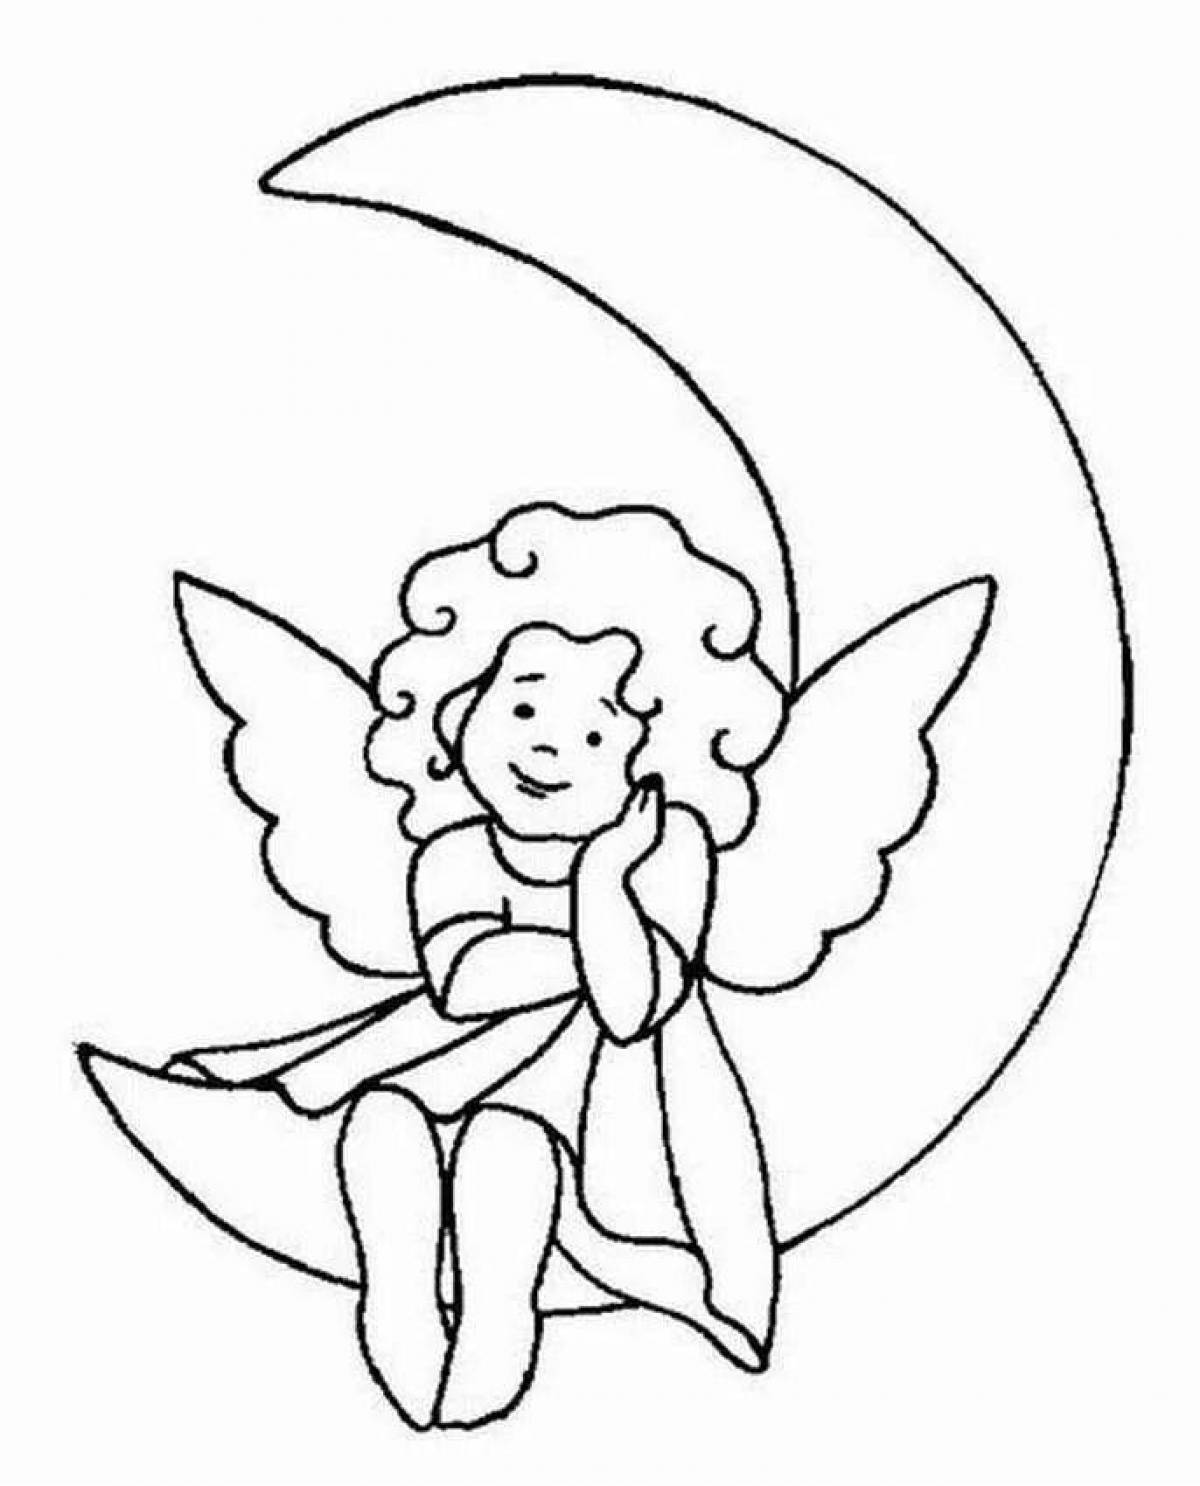 Sky-blessed angel coloring page